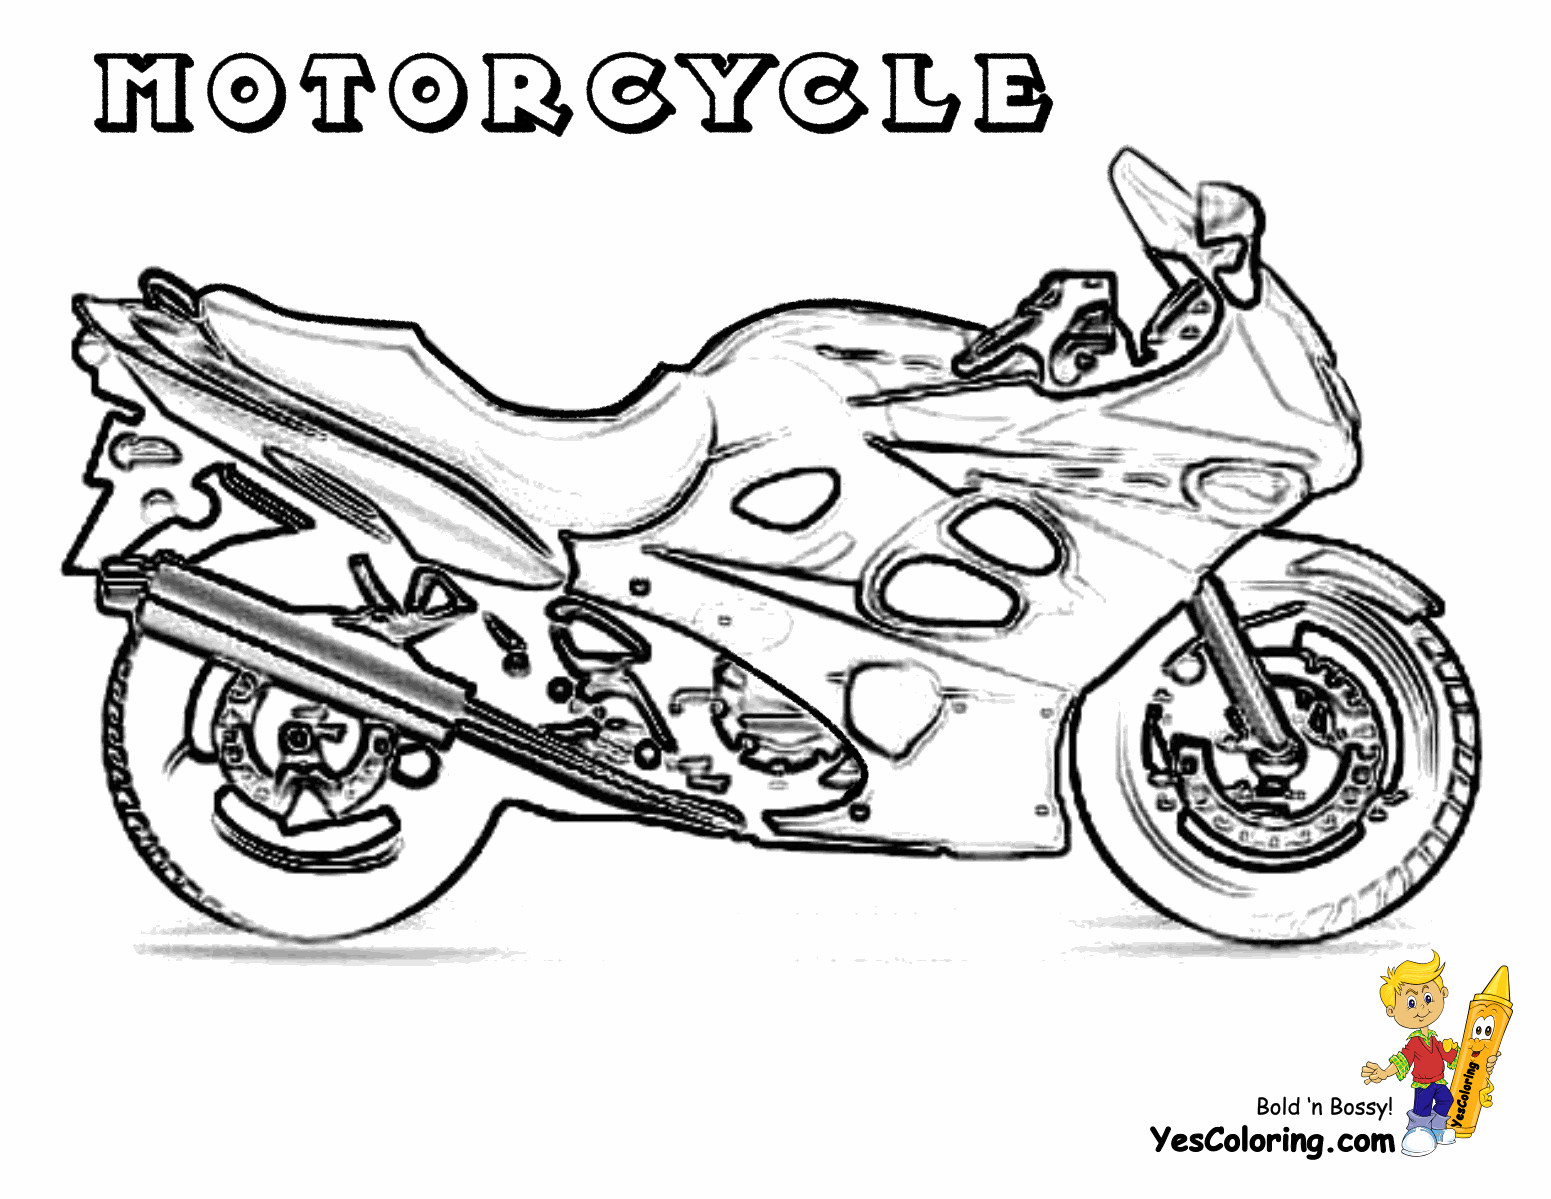 Motorcycle Coloring Pages For Kids
 Cool Coloring Motorcycles Motorcycles